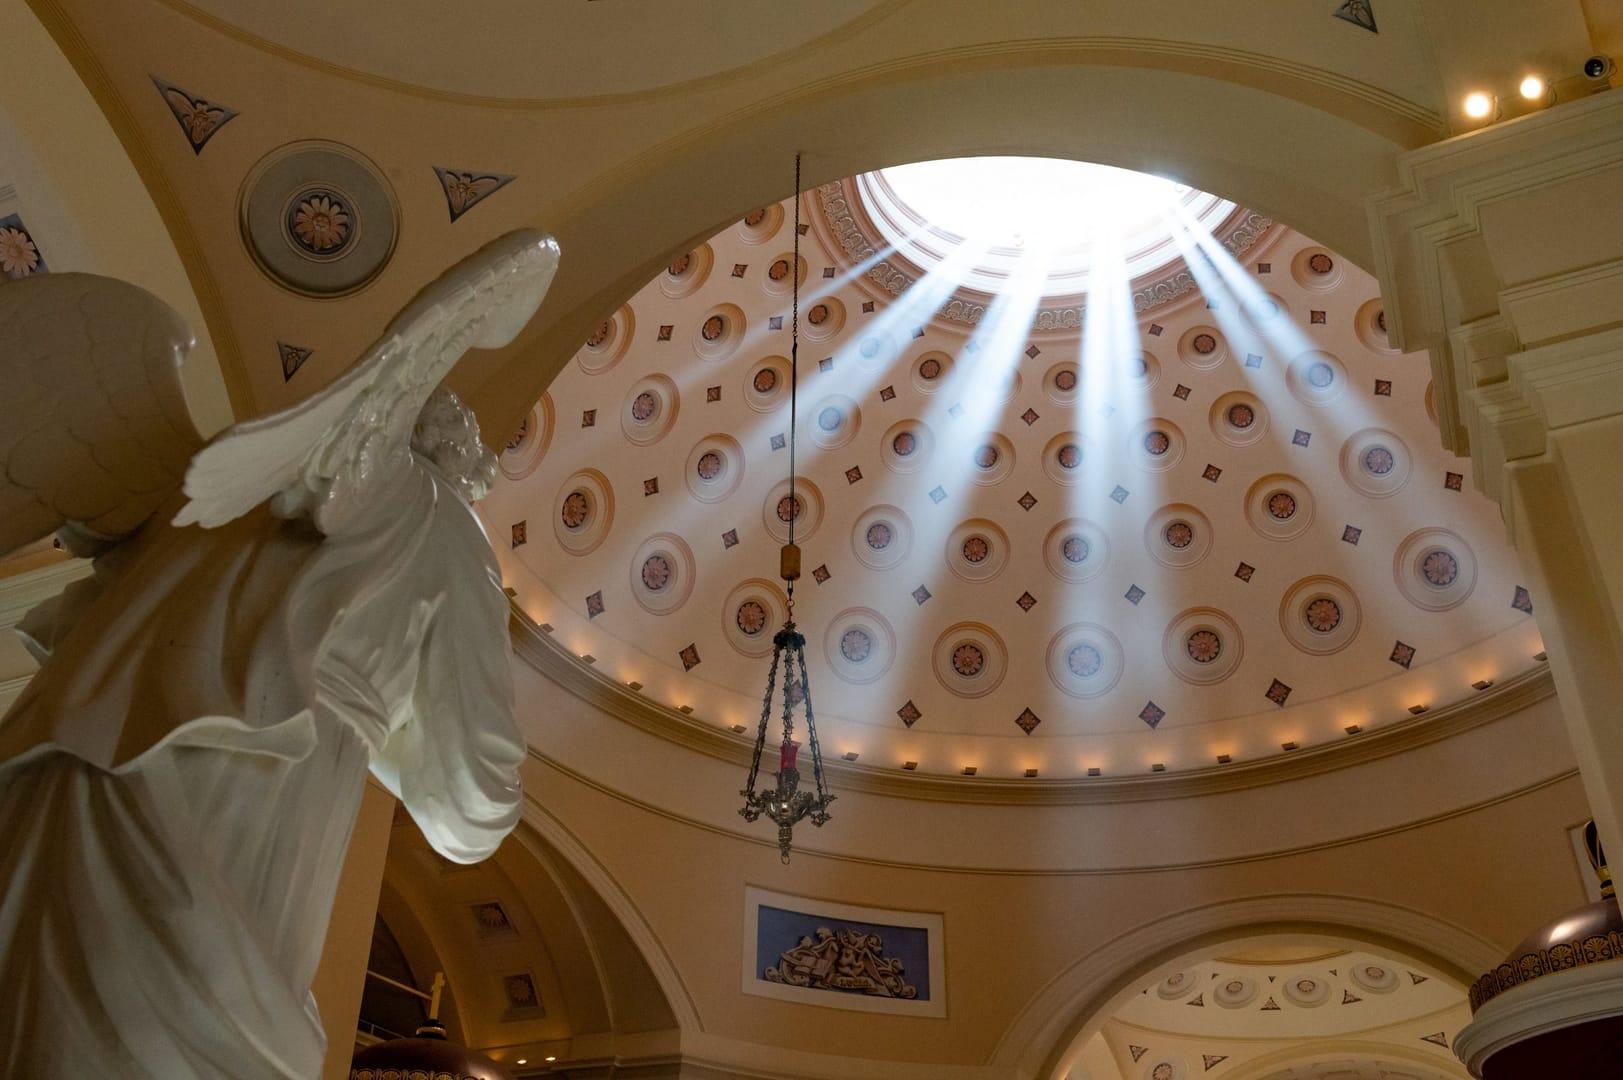 Baltimore Basilica marks bicentennial with new perpetual adoration chapel